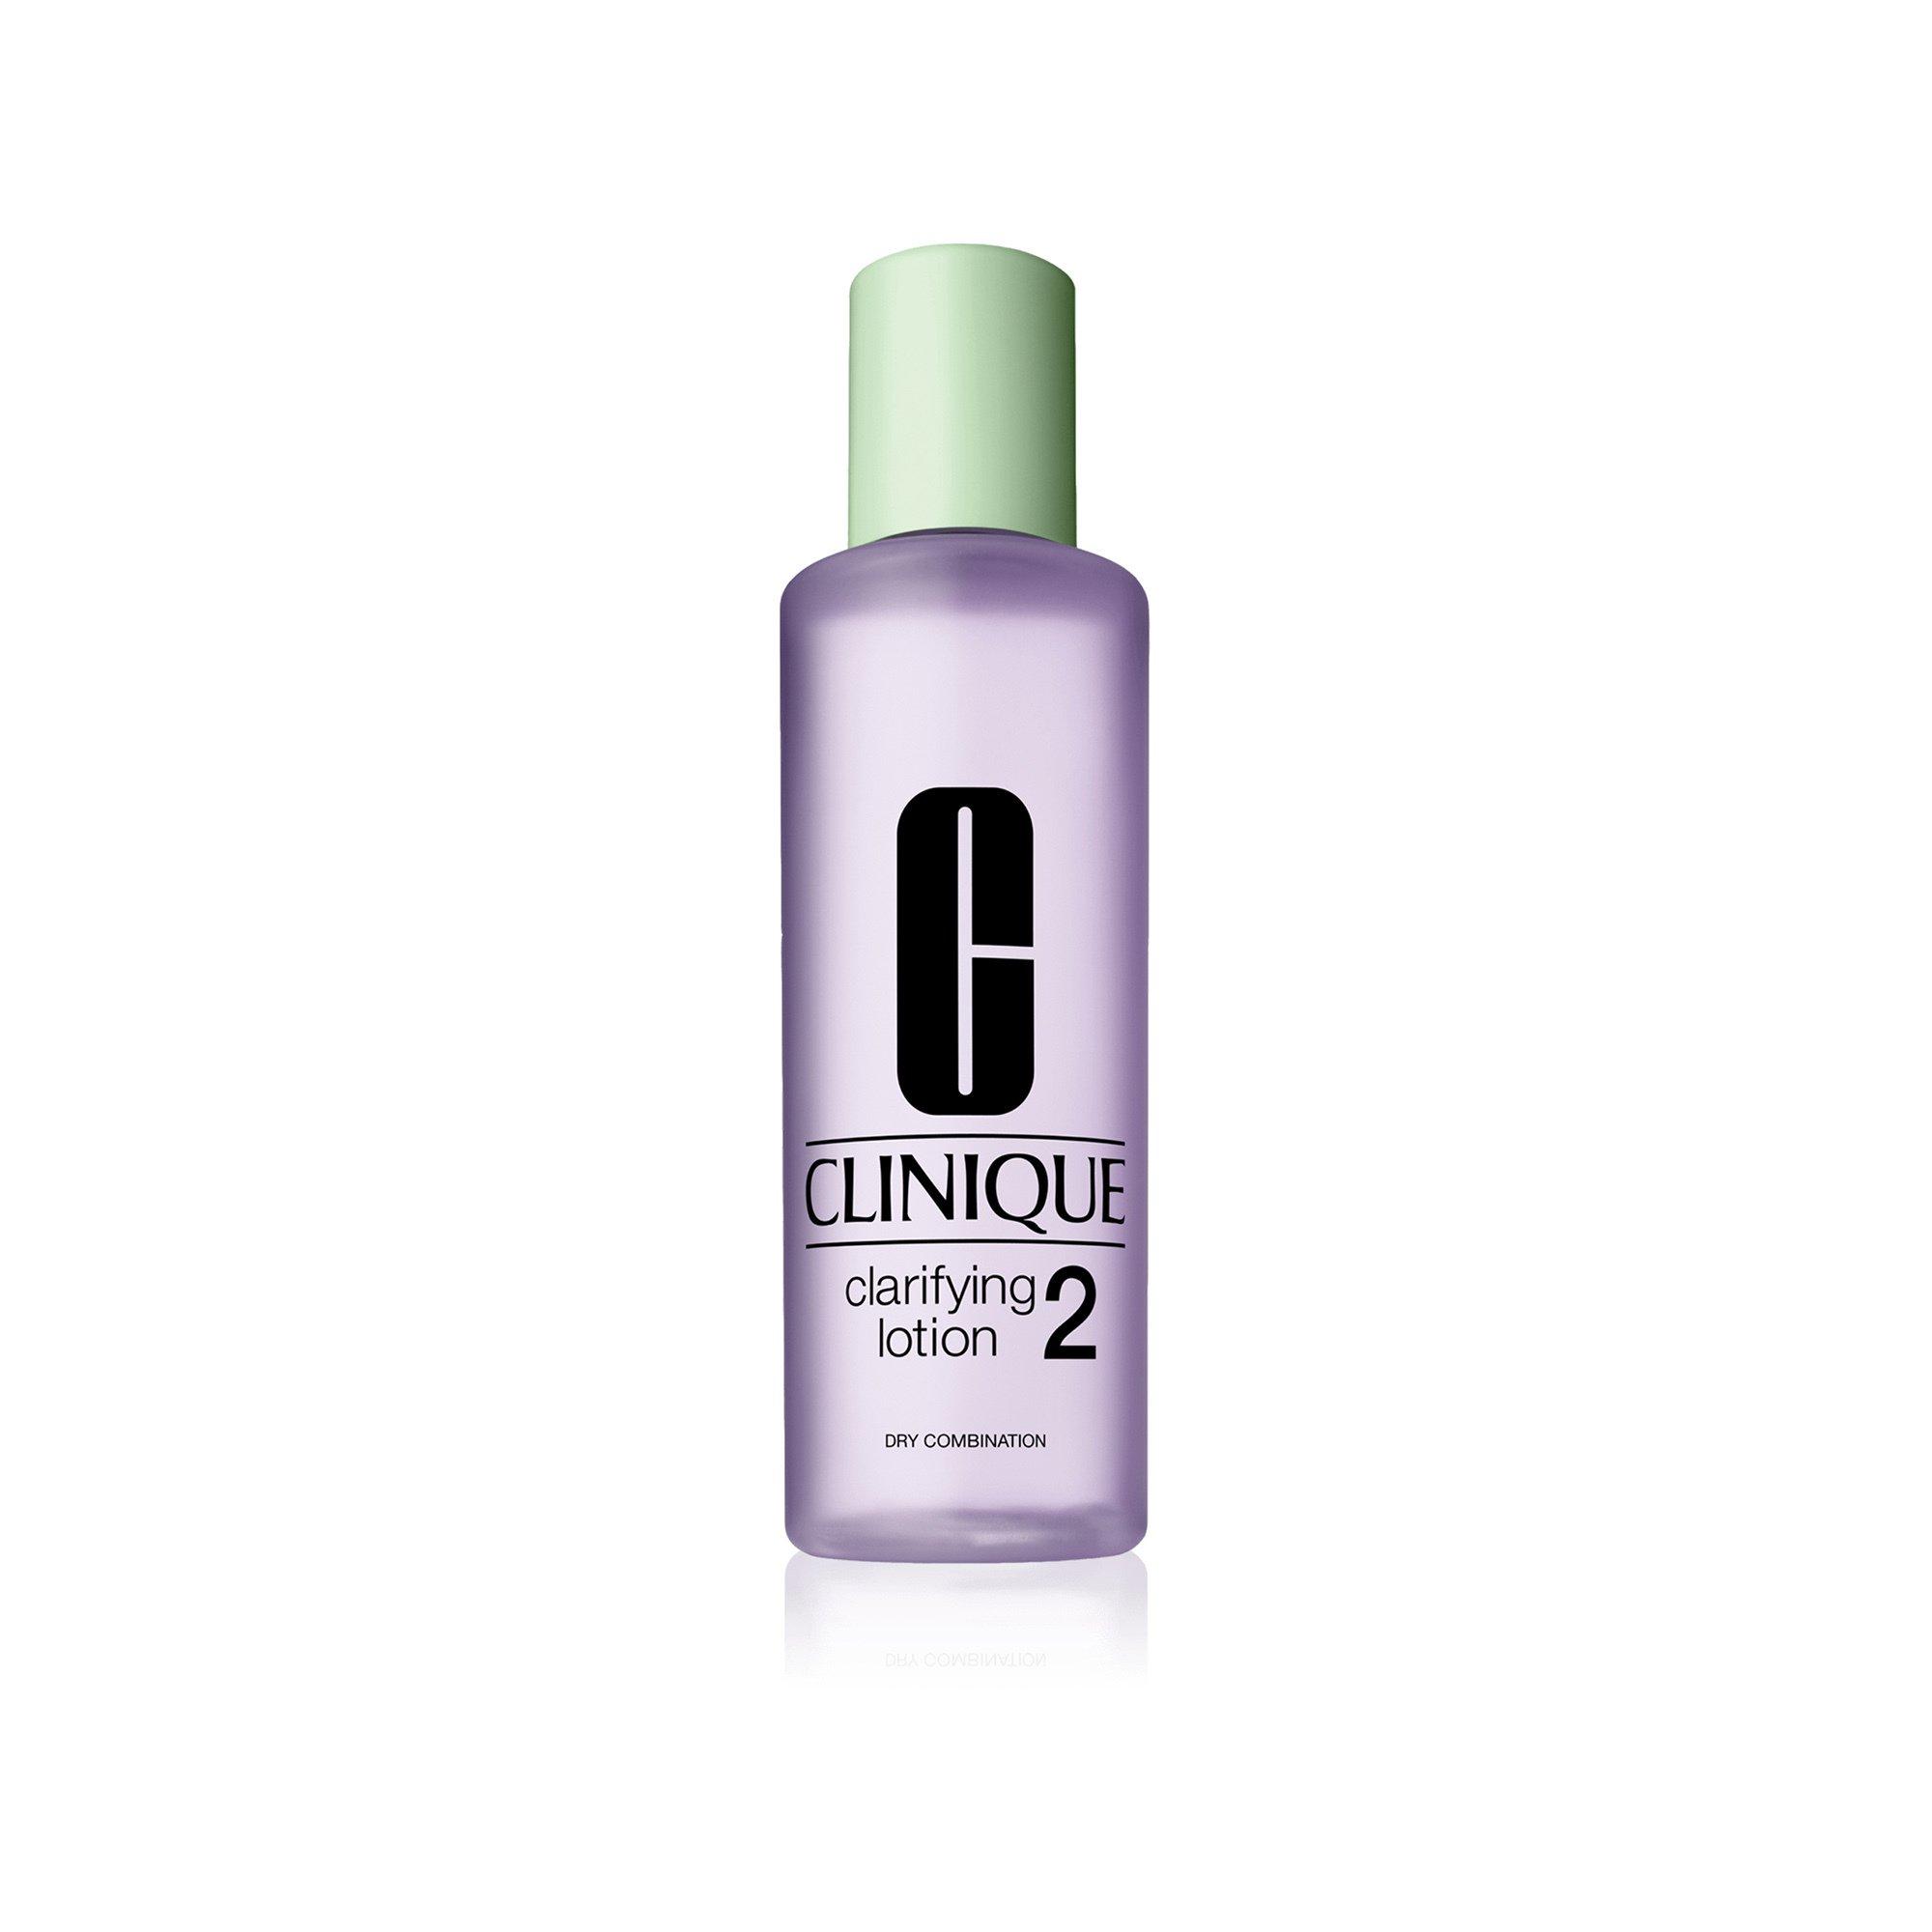 Image of CLINIQUE Clarifying Lotion 2 - 200ml